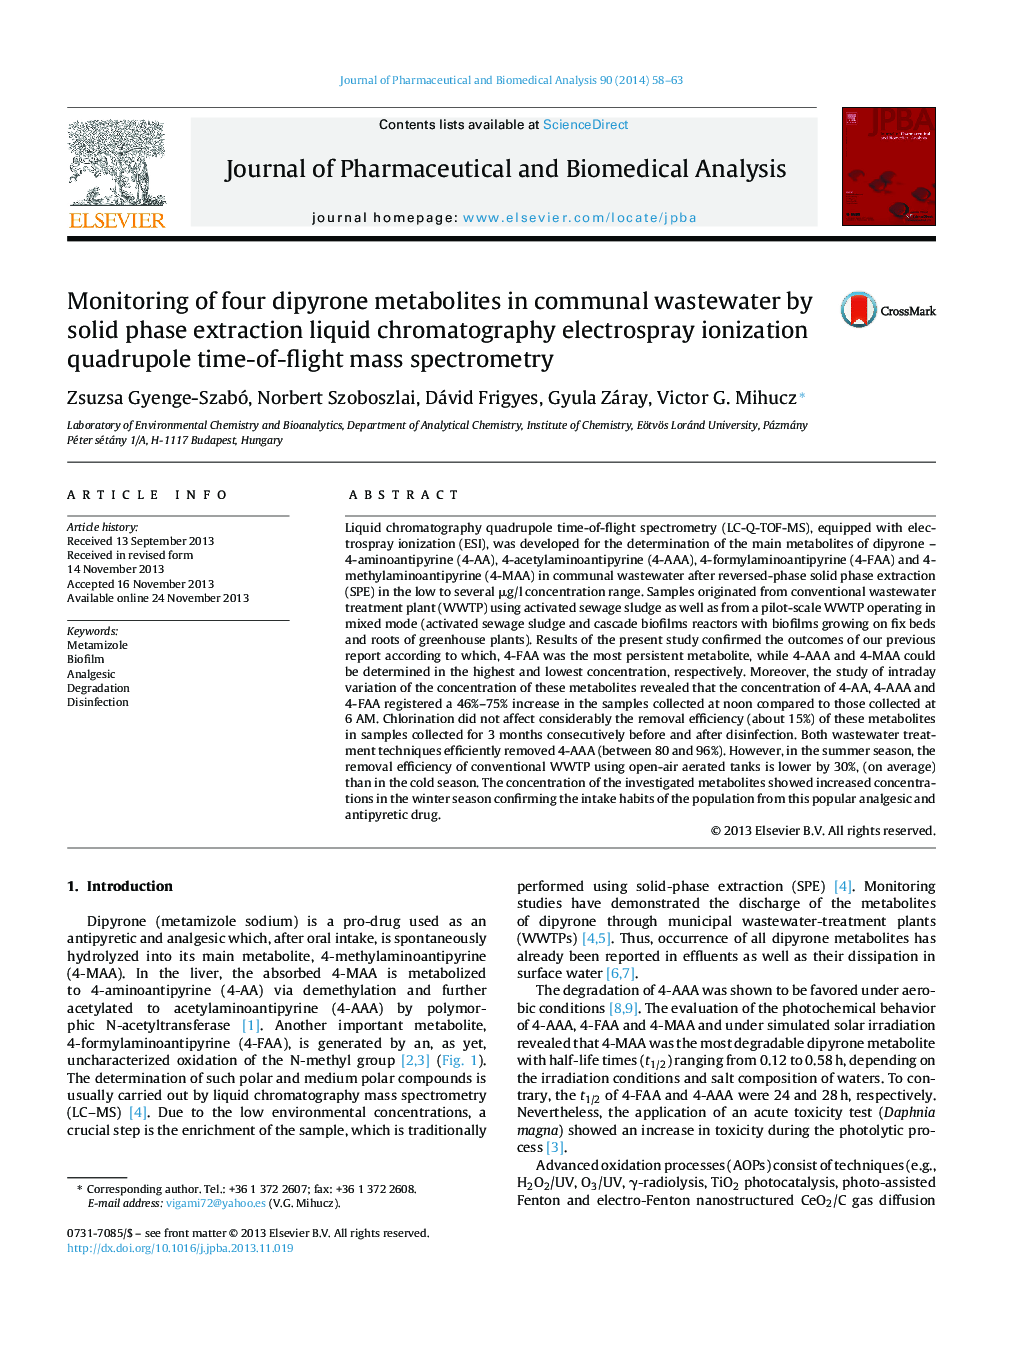 Monitoring of four dipyrone metabolites in communal wastewater by solid phase extraction liquid chromatography electrospray ionization quadrupole time-of-flight mass spectrometry